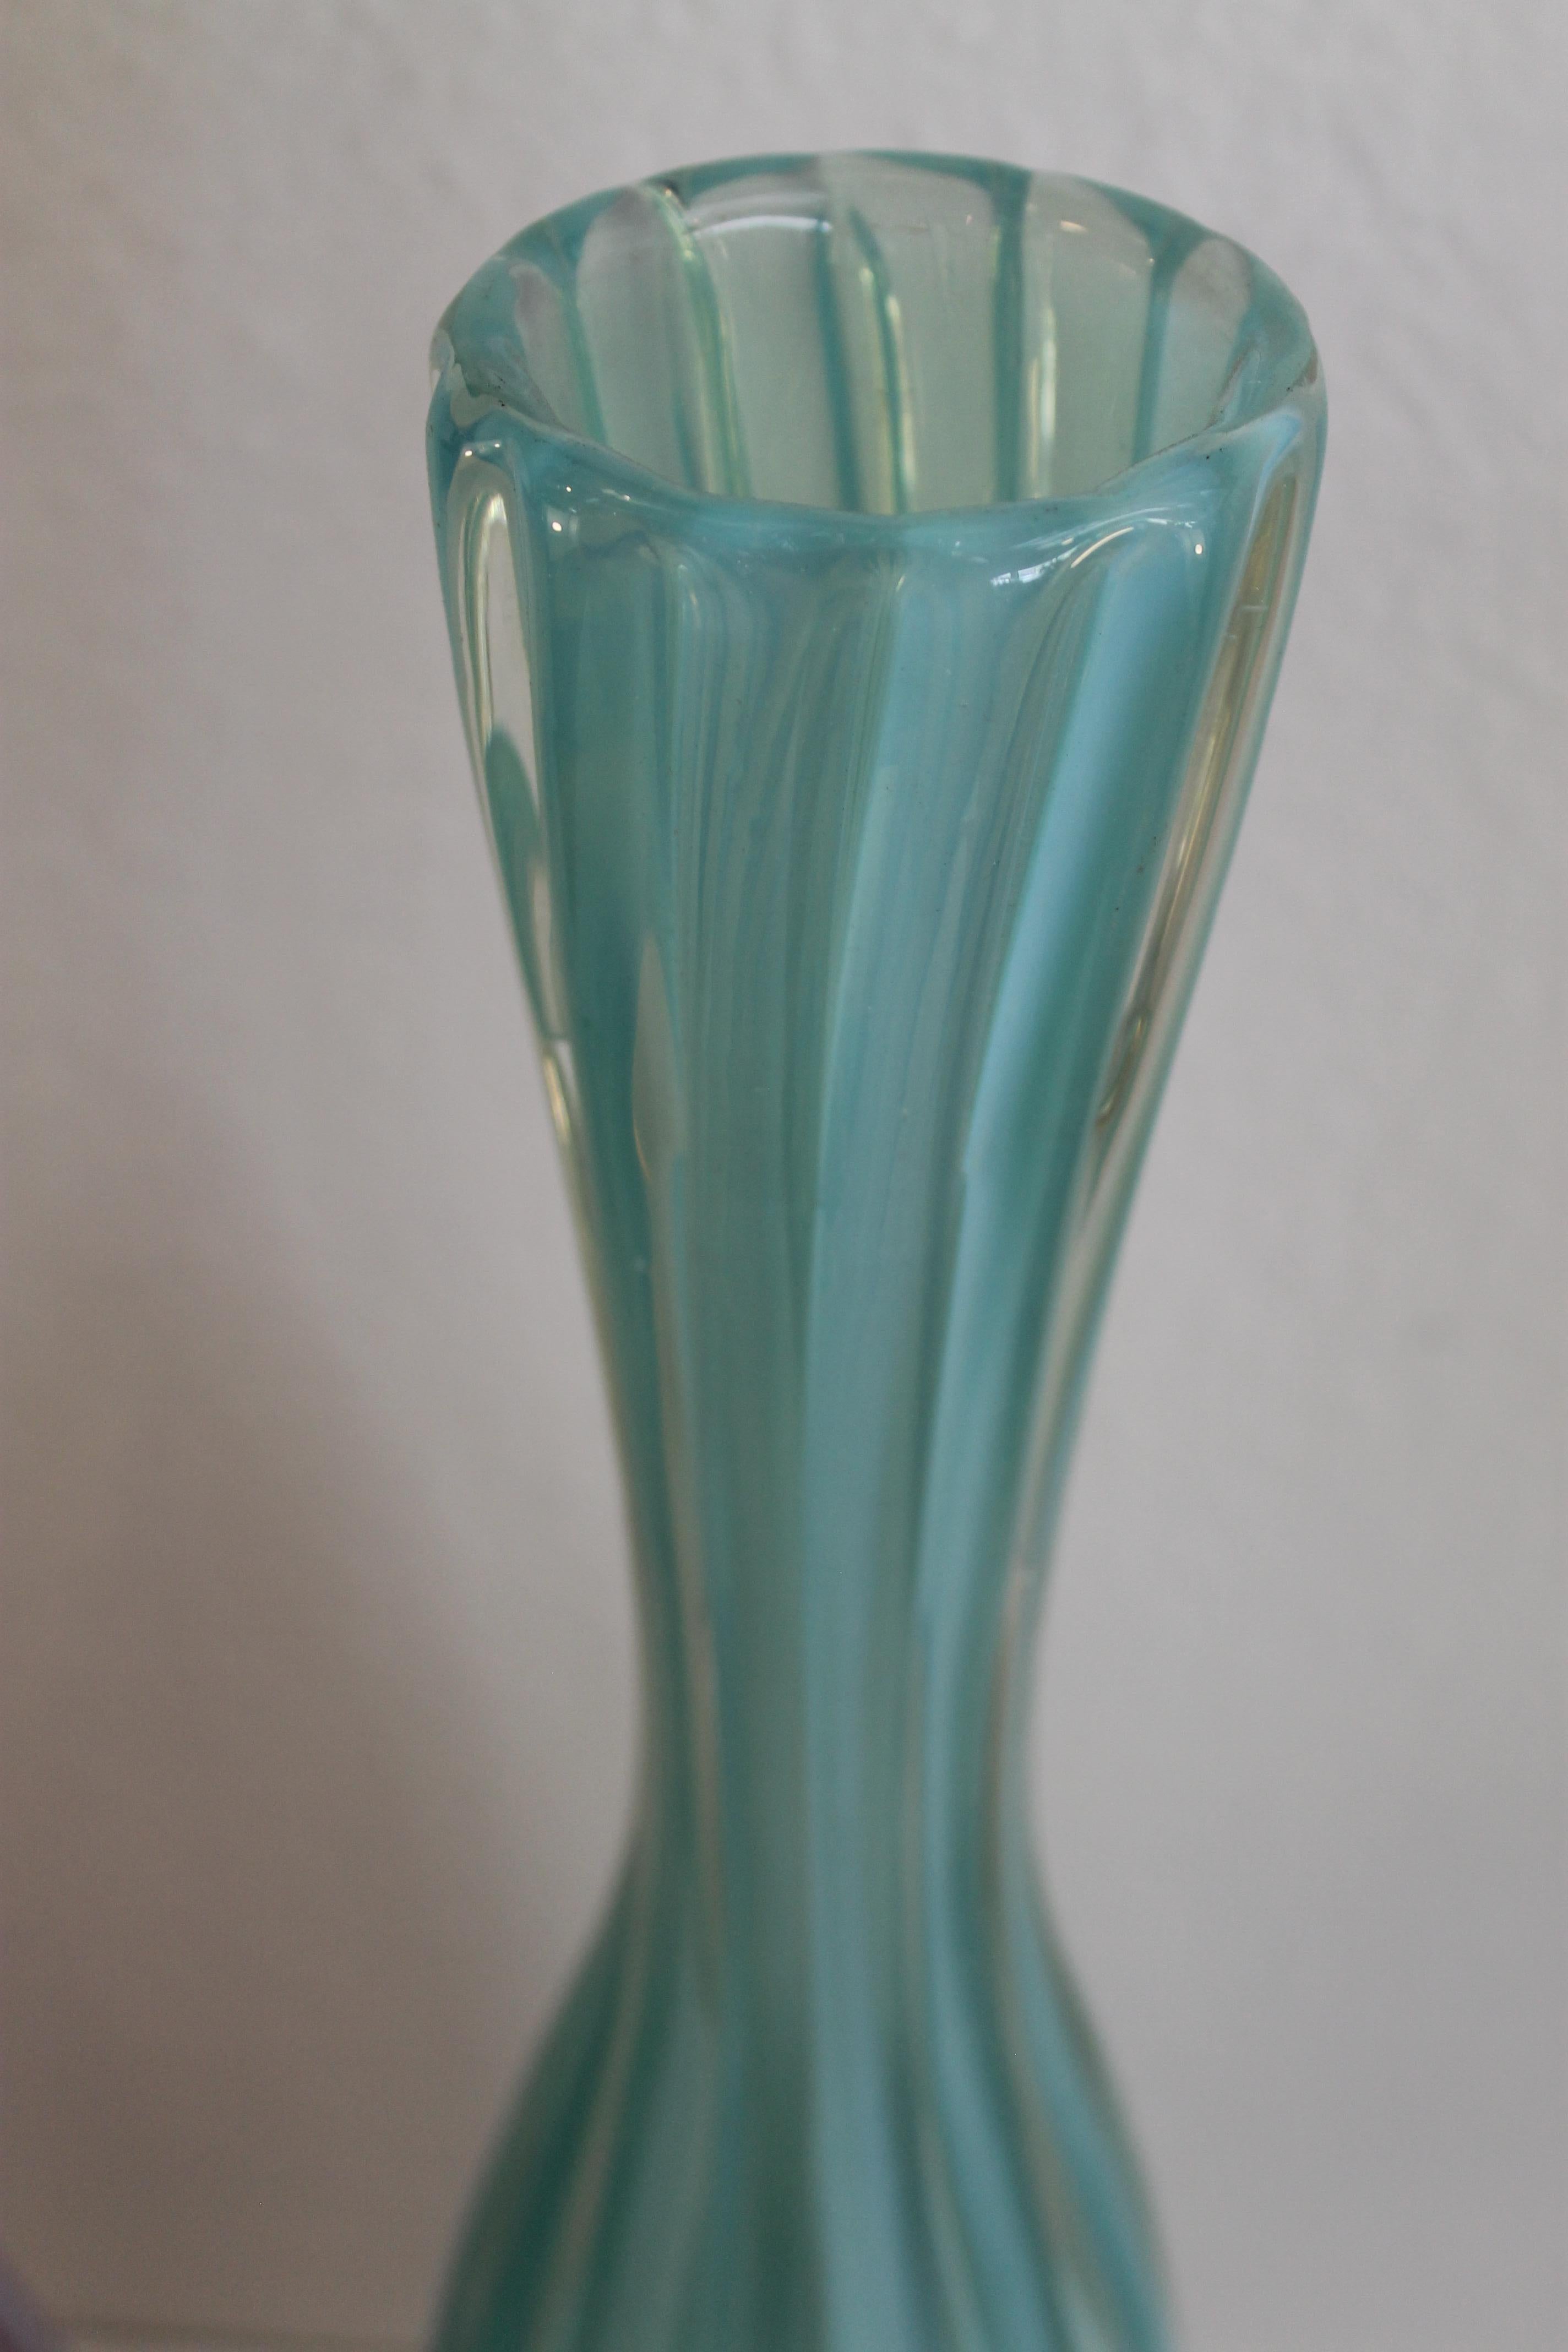 Italian Pair of Murano Cranberry, Turquoise and Opaque Vases For Sale